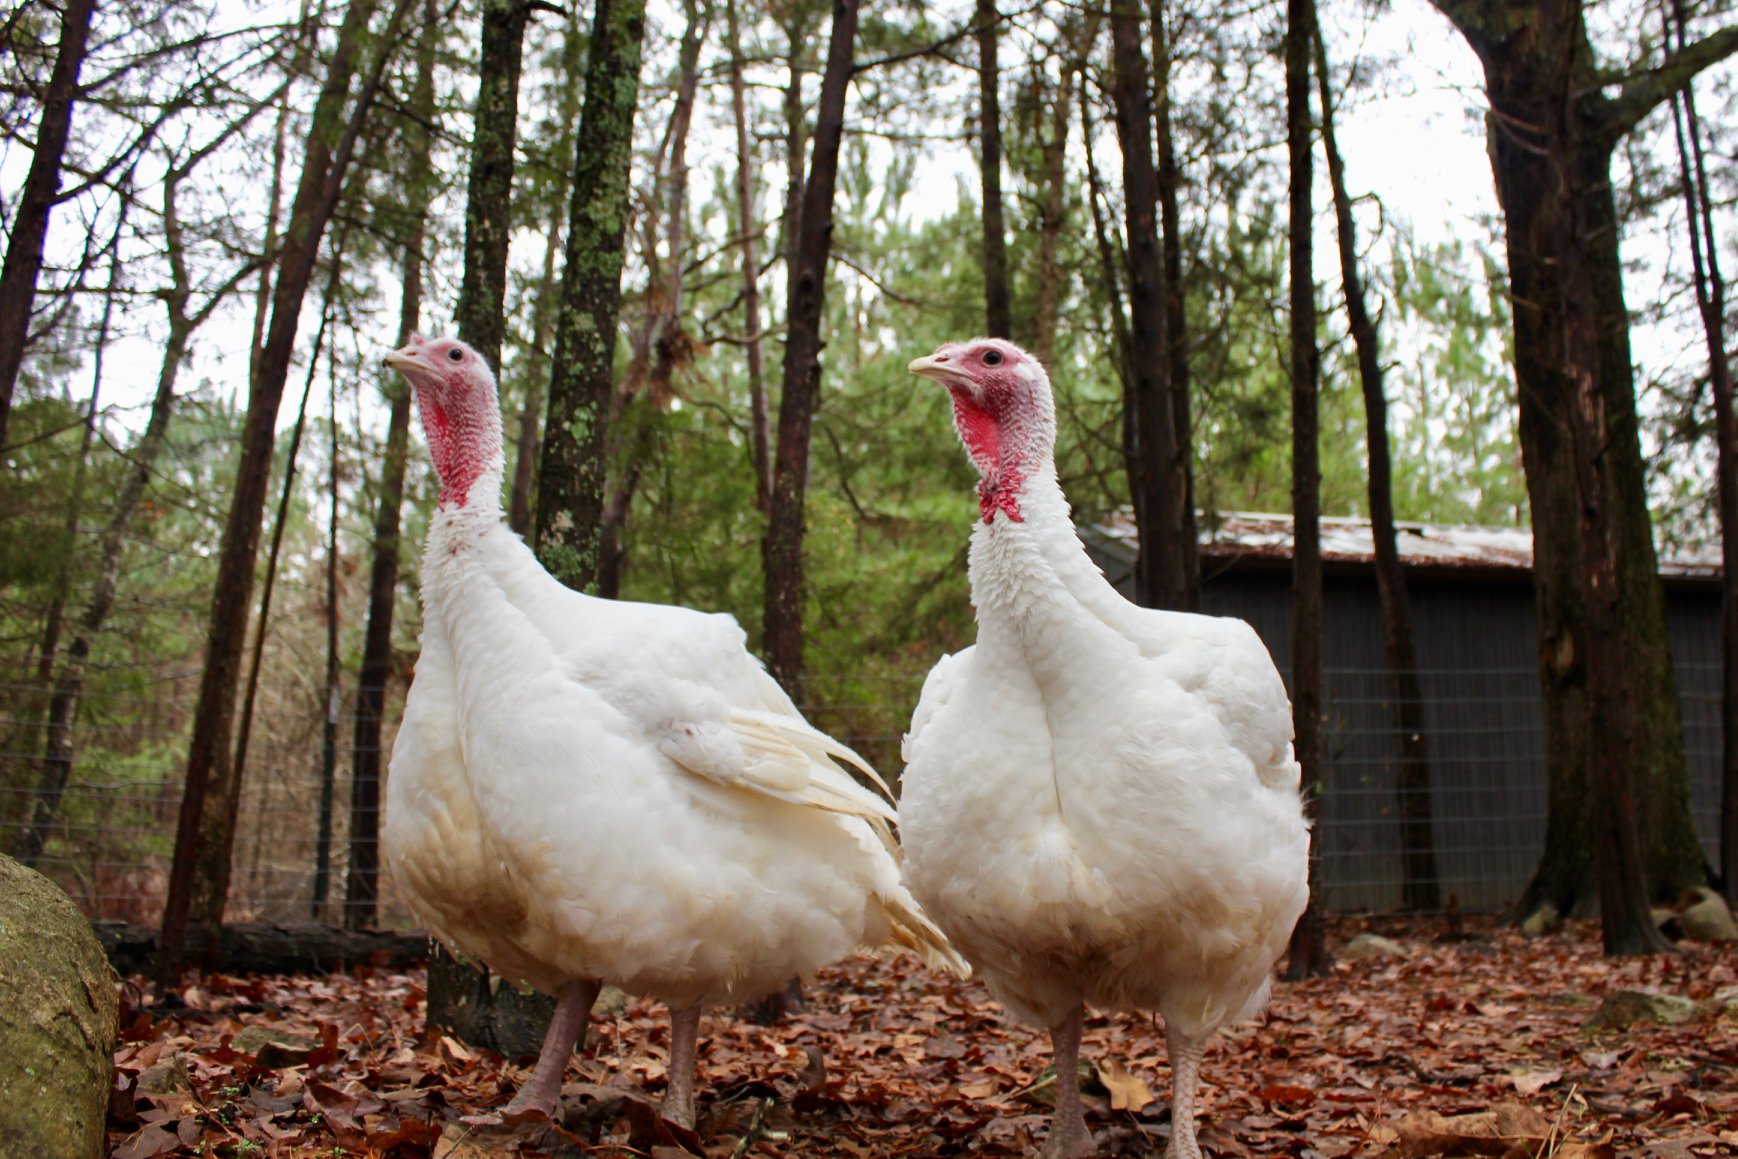 Two young white turkeys